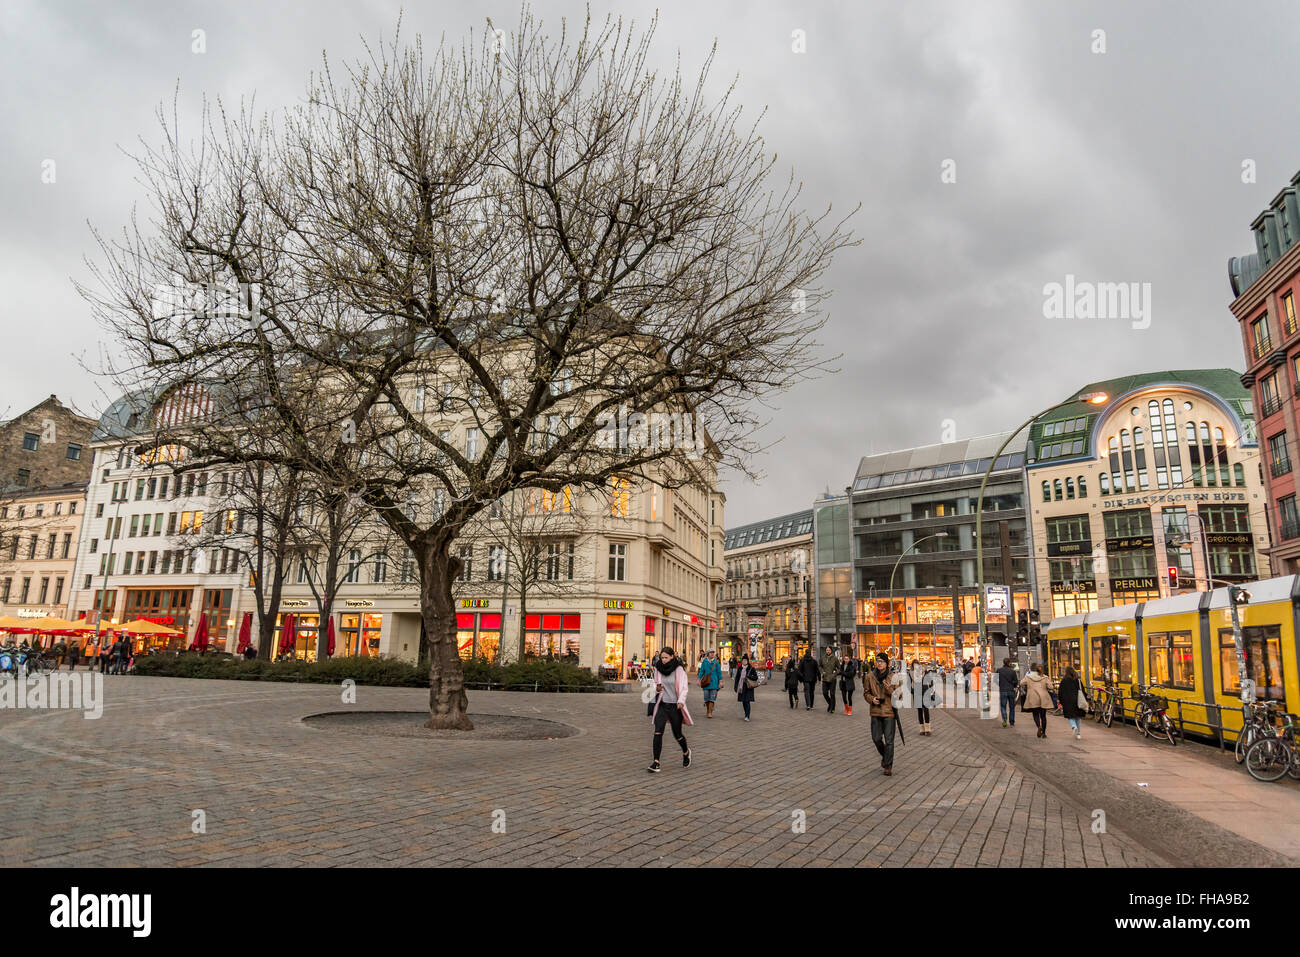 BERLIN - APRIL 1: People walk and enjoy the square in Hackescher Markt on April 1, 2015 in Berlin, Germany Stock Photo